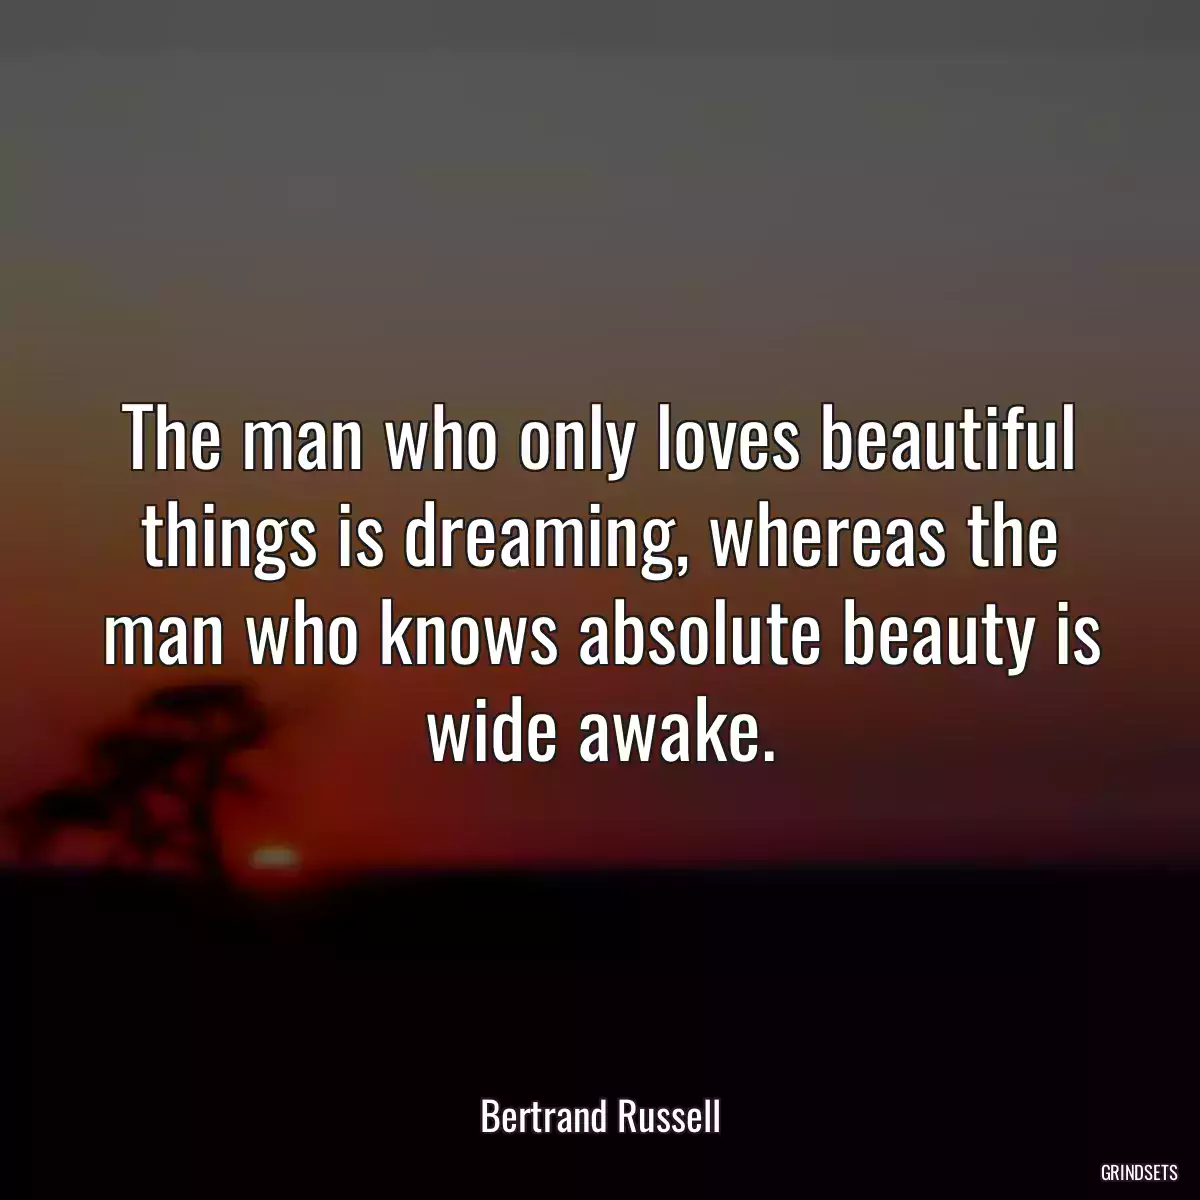 The man who only loves beautiful things is dreaming, whereas the man who knows absolute beauty is wide awake.